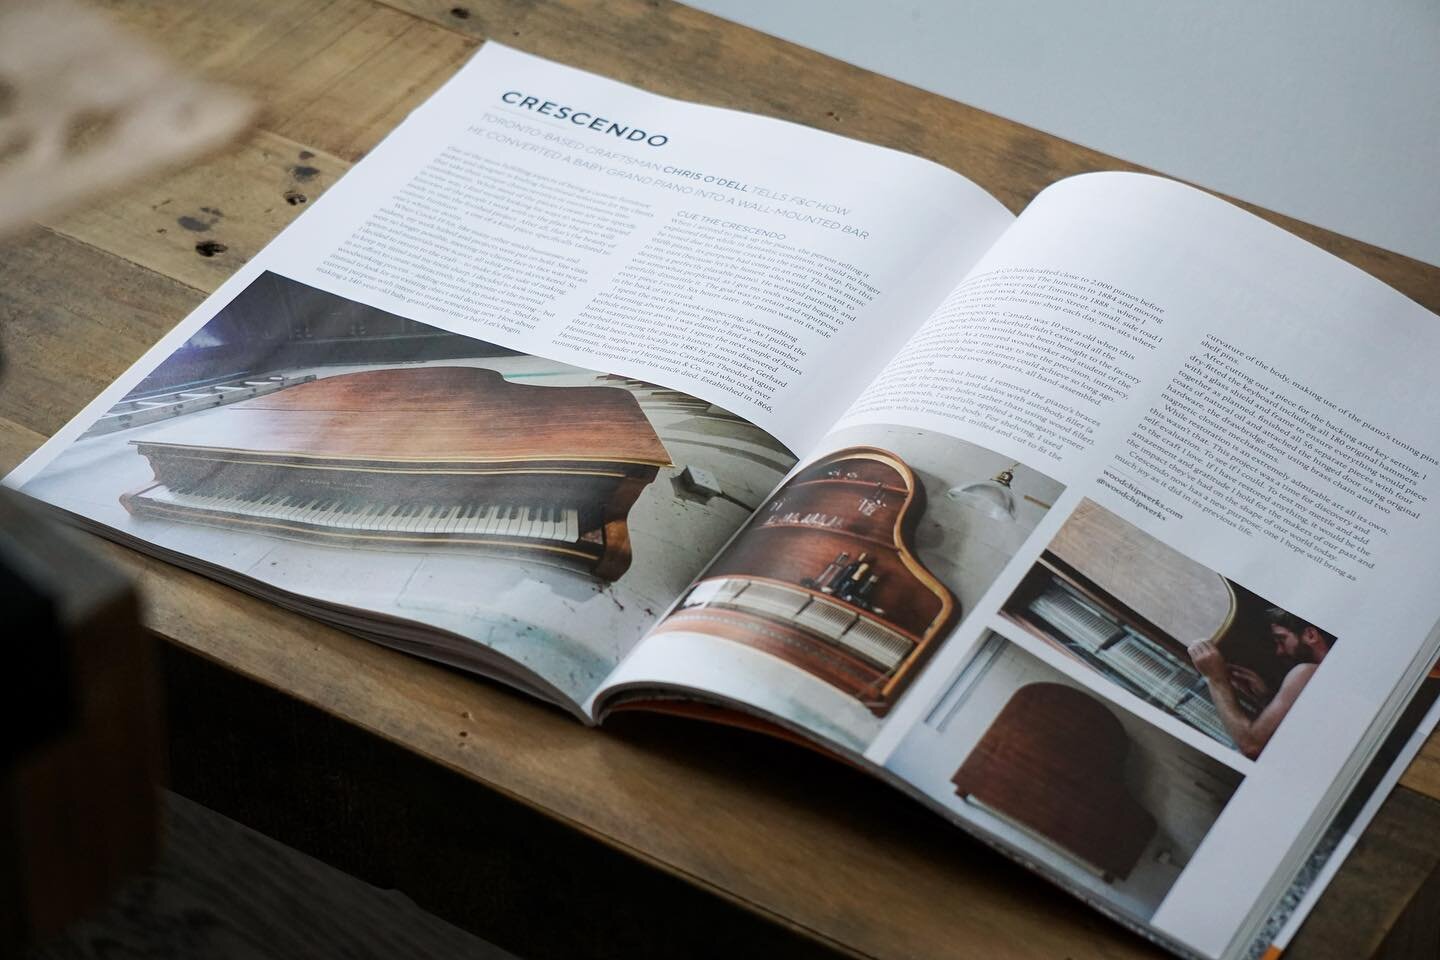 Immensely grateful to be featured in Issue #302 of UK-based Furniture &amp; Cabinetmaking magazine - and in such great company. F&amp;C is available on newsstands internationally now! 

#woodchipwerks #madebyhand #madeintoronto #fandcmagazine #woodwo